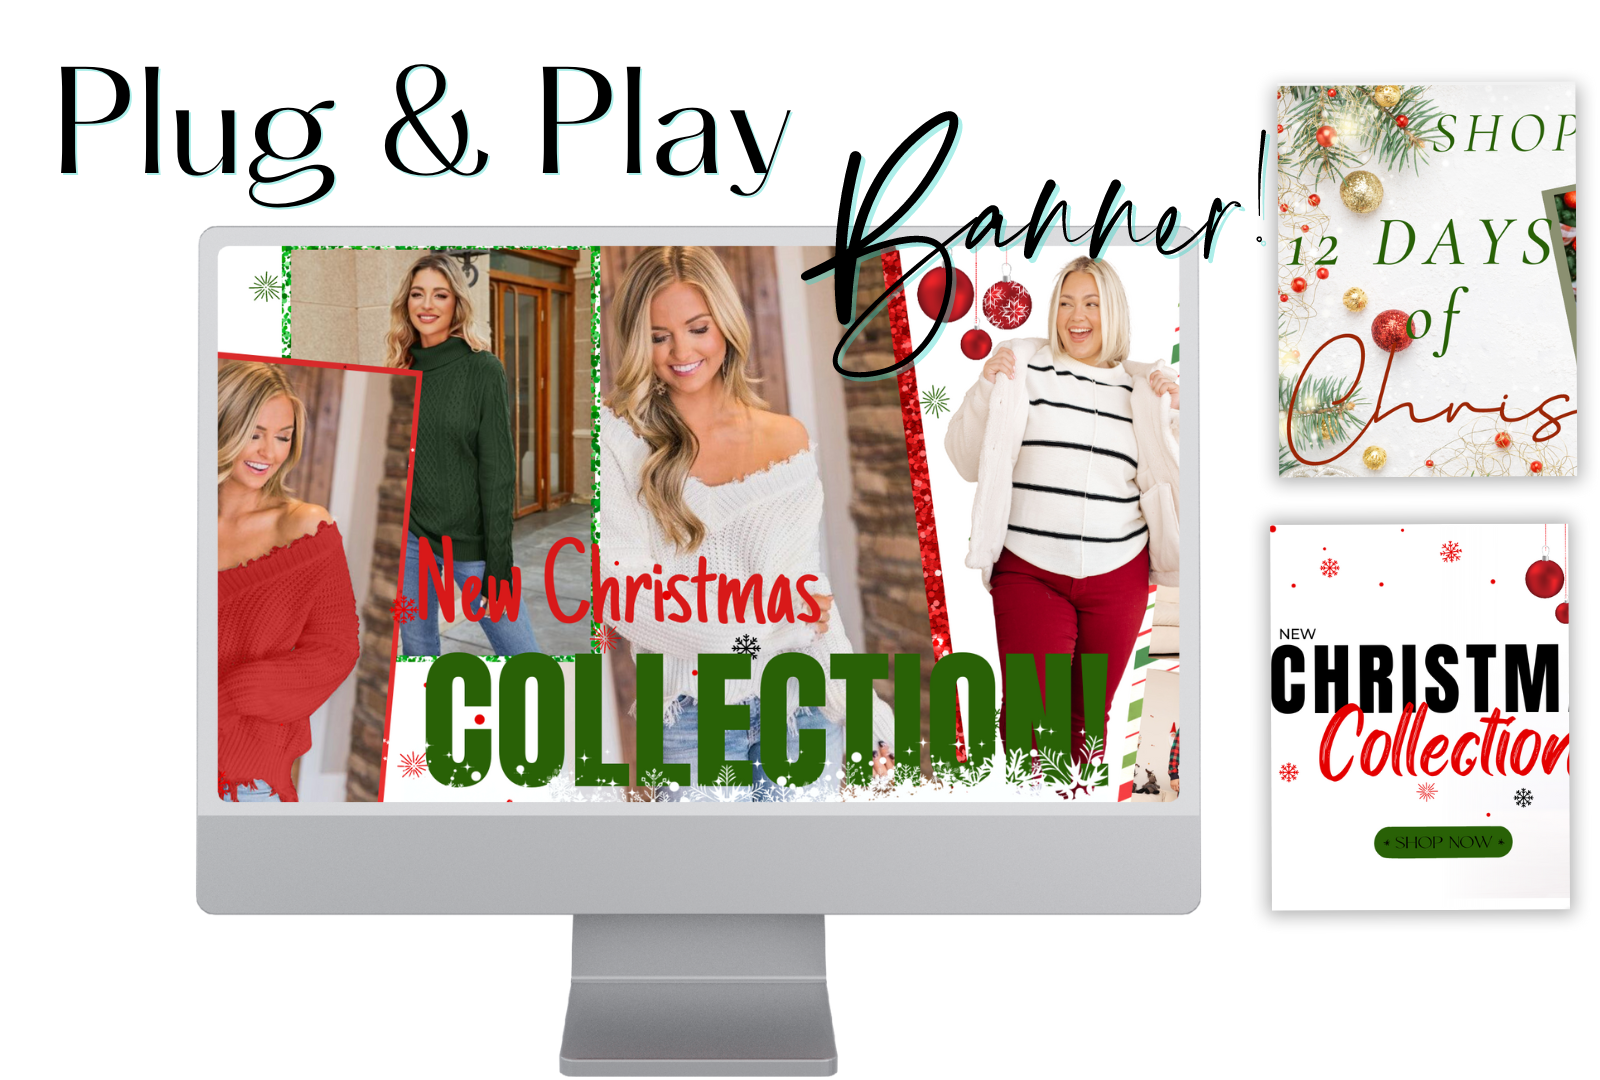 Christmas Inspired Banners - Boutique Marketing Studio